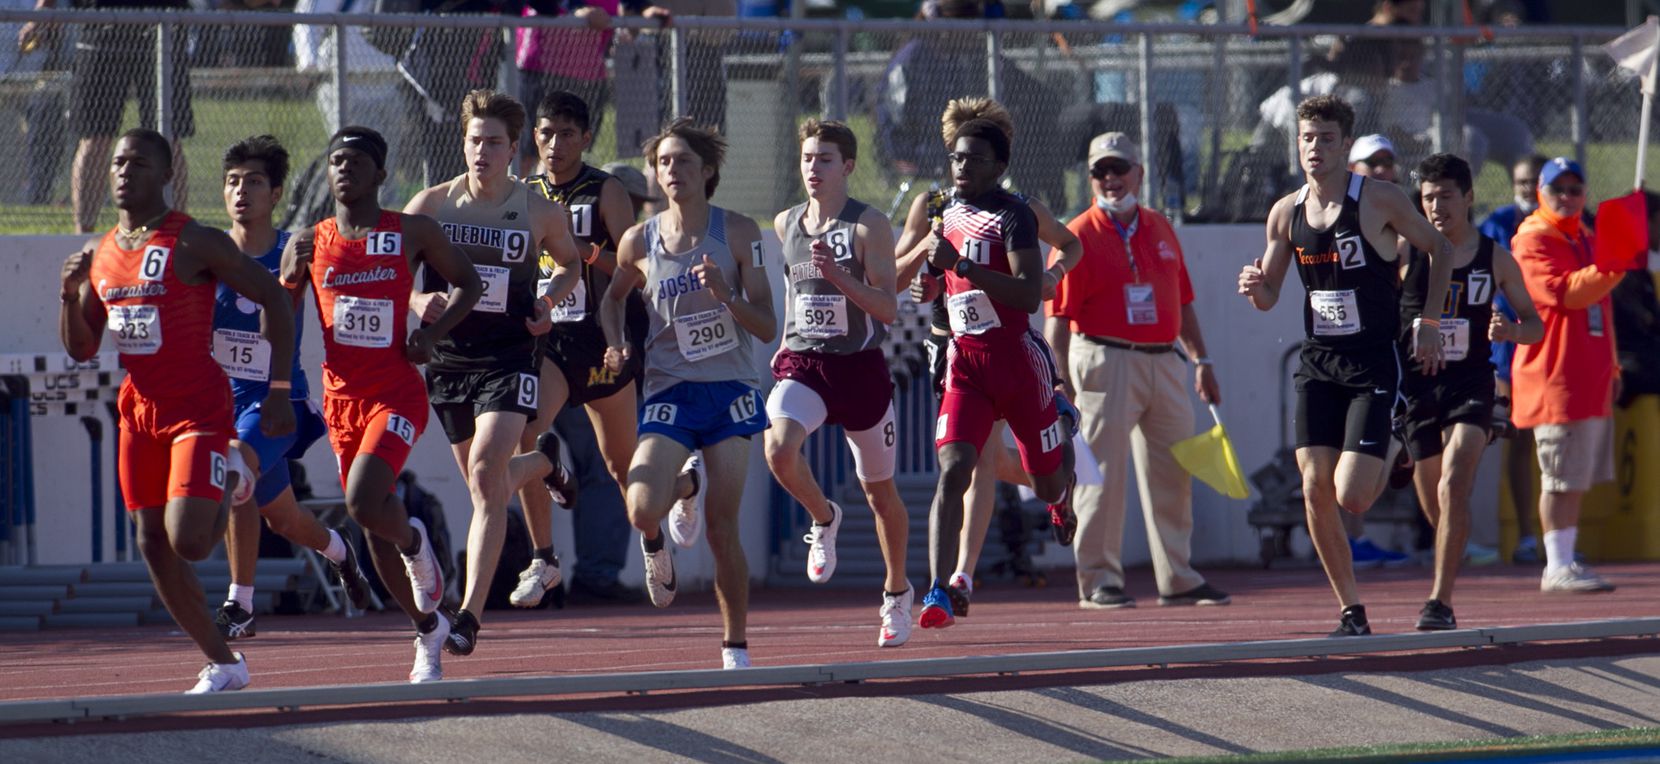 Photos See the best moments from the UIL track and field regional meet